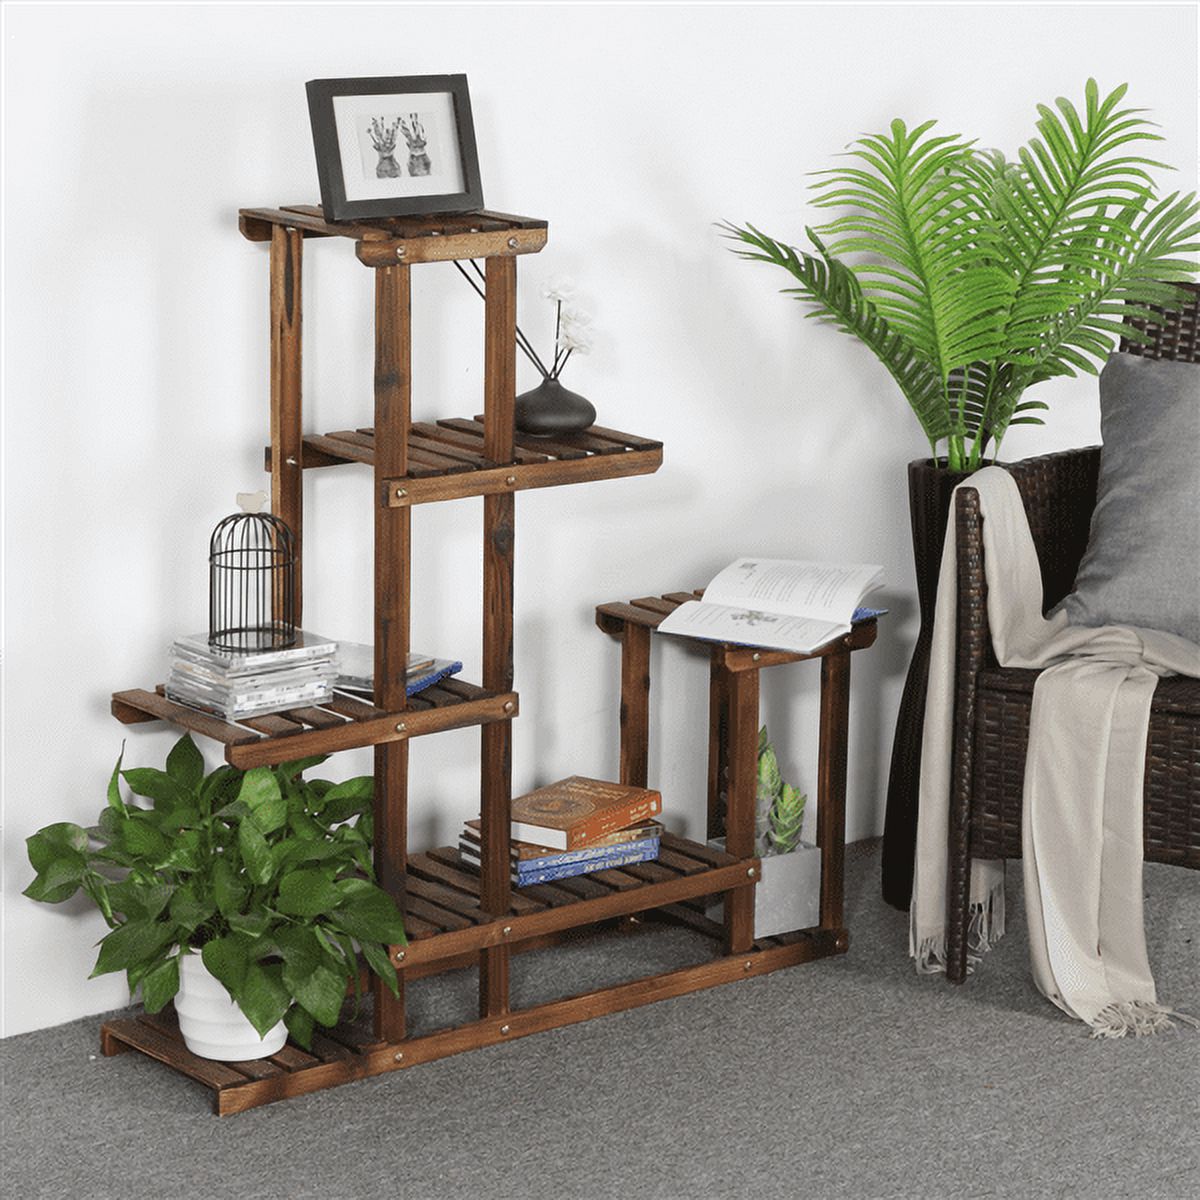 6-Shelf Wooden Flower Stand Plant Display for Indoors and Outdoors - image 3 of 7